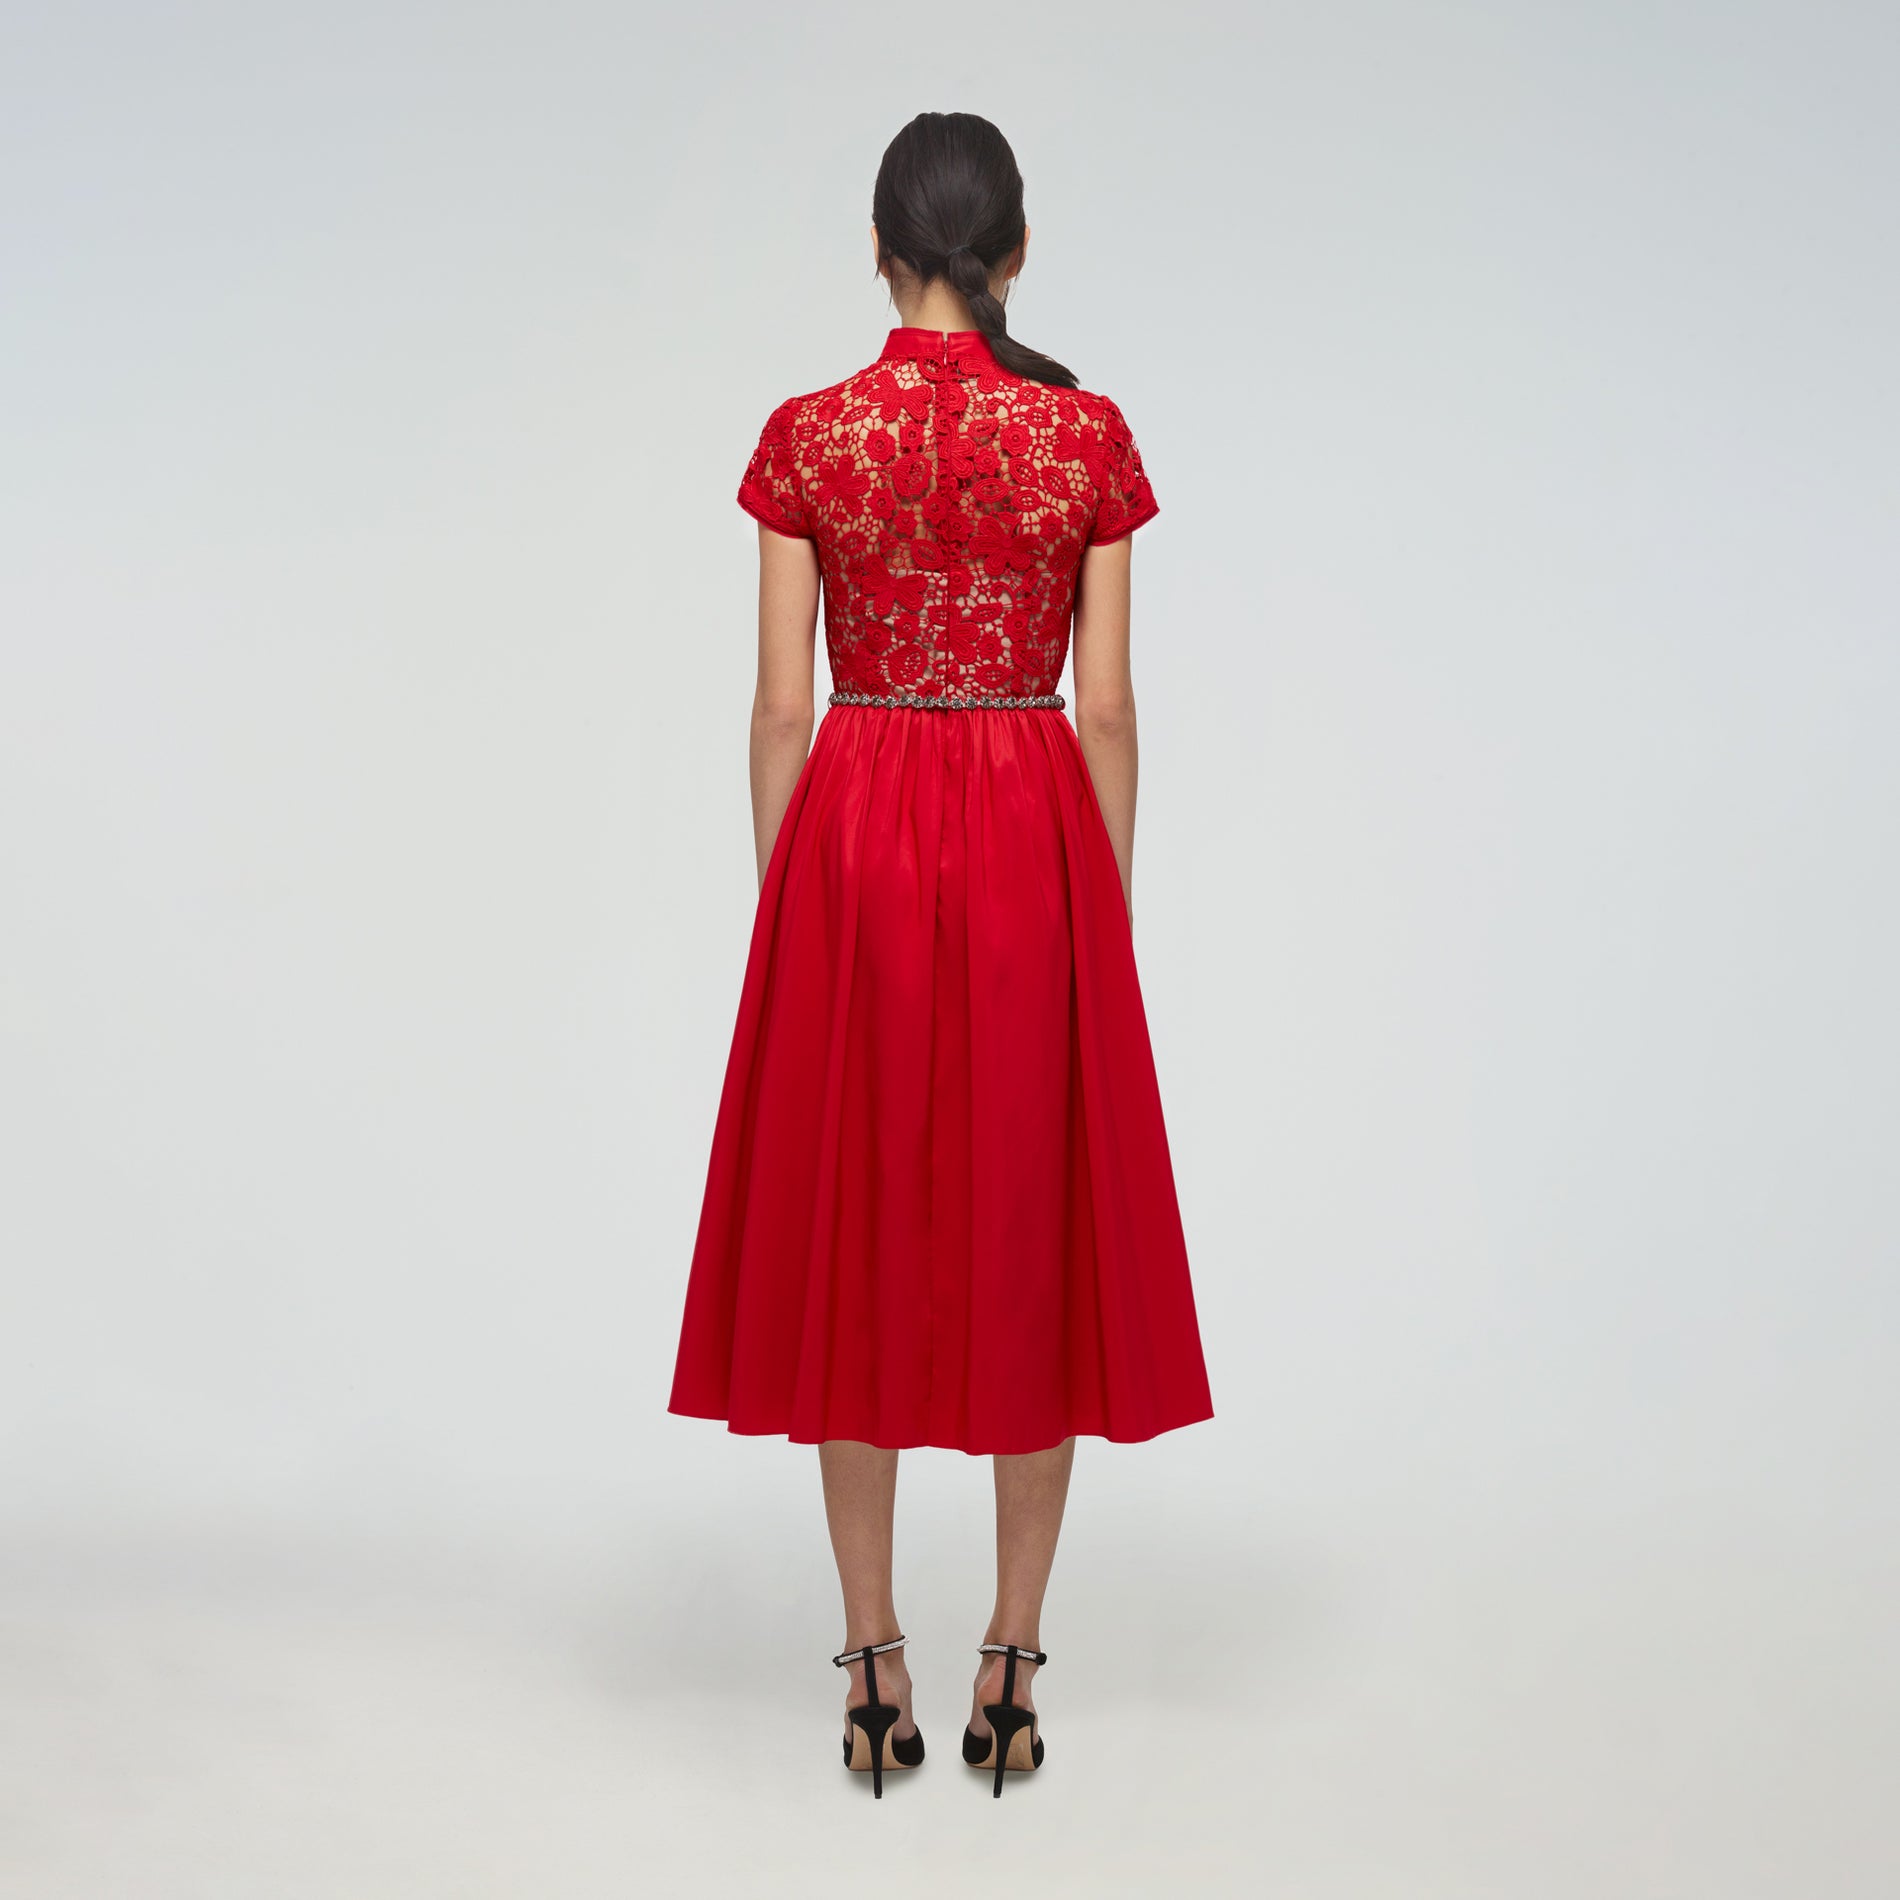 A woman wearing the Red Guipure Lace and Taffeta Midi Dress